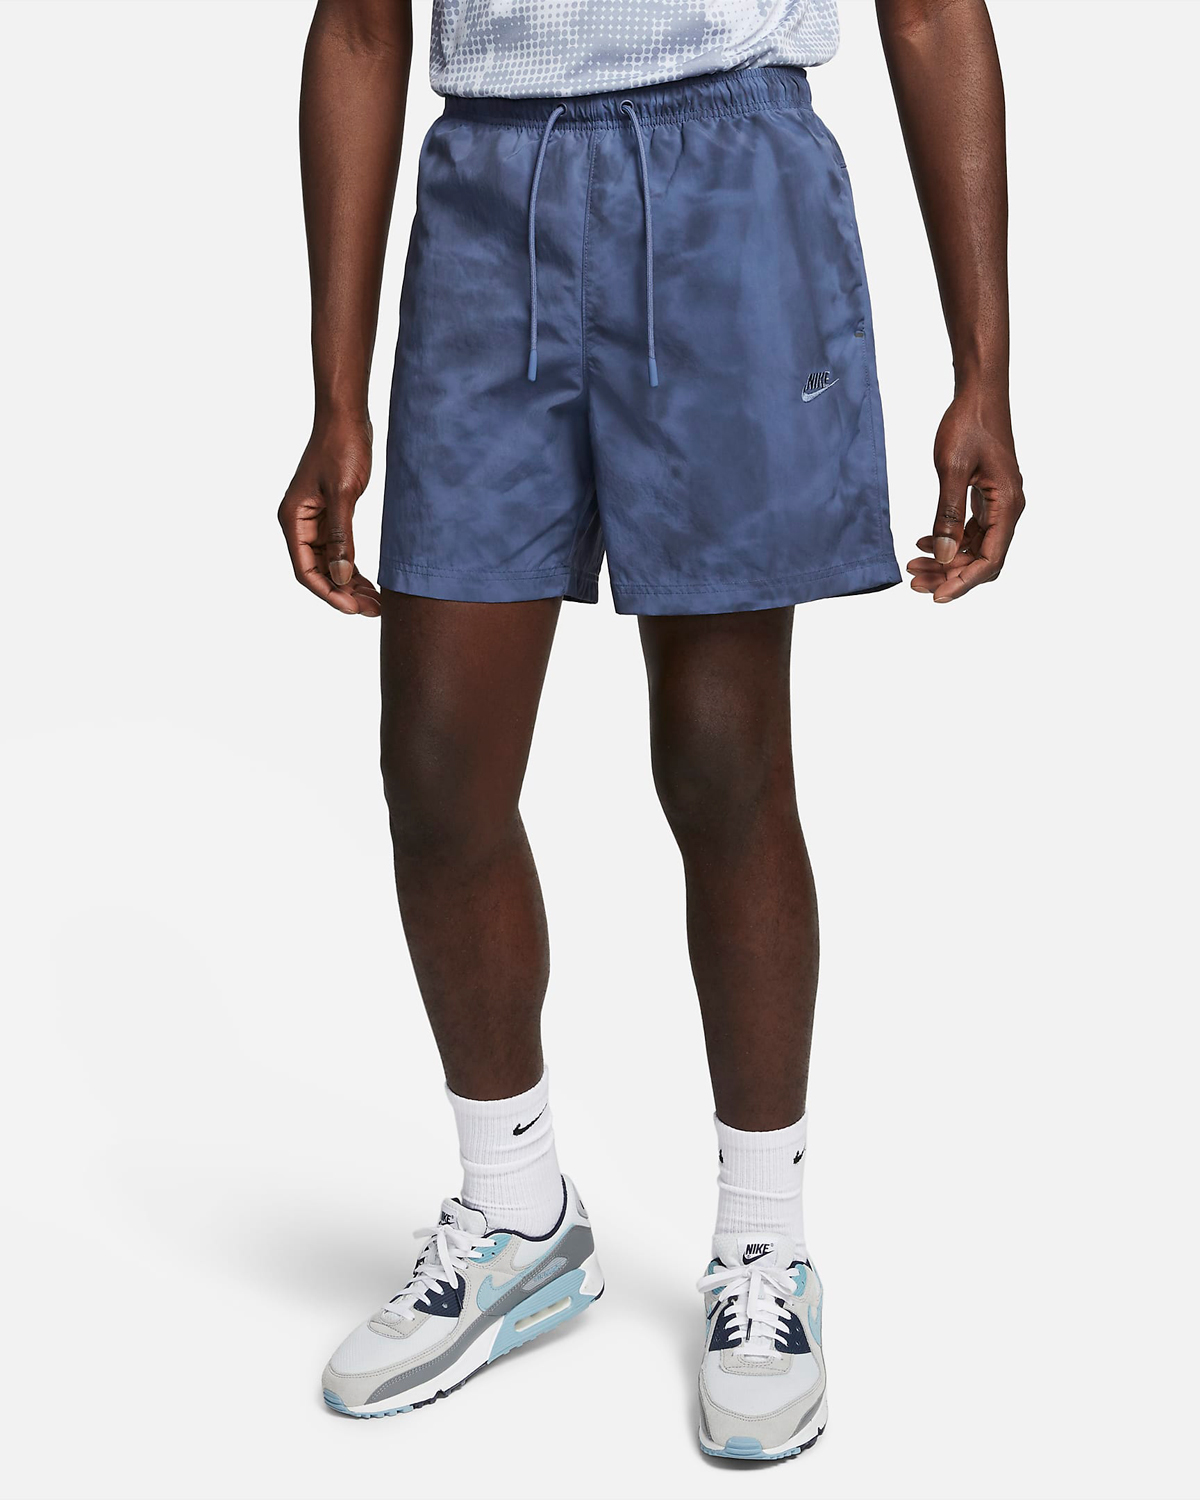 Nike-Tech-Pack-Woven-Shorts-Diffused-Blue